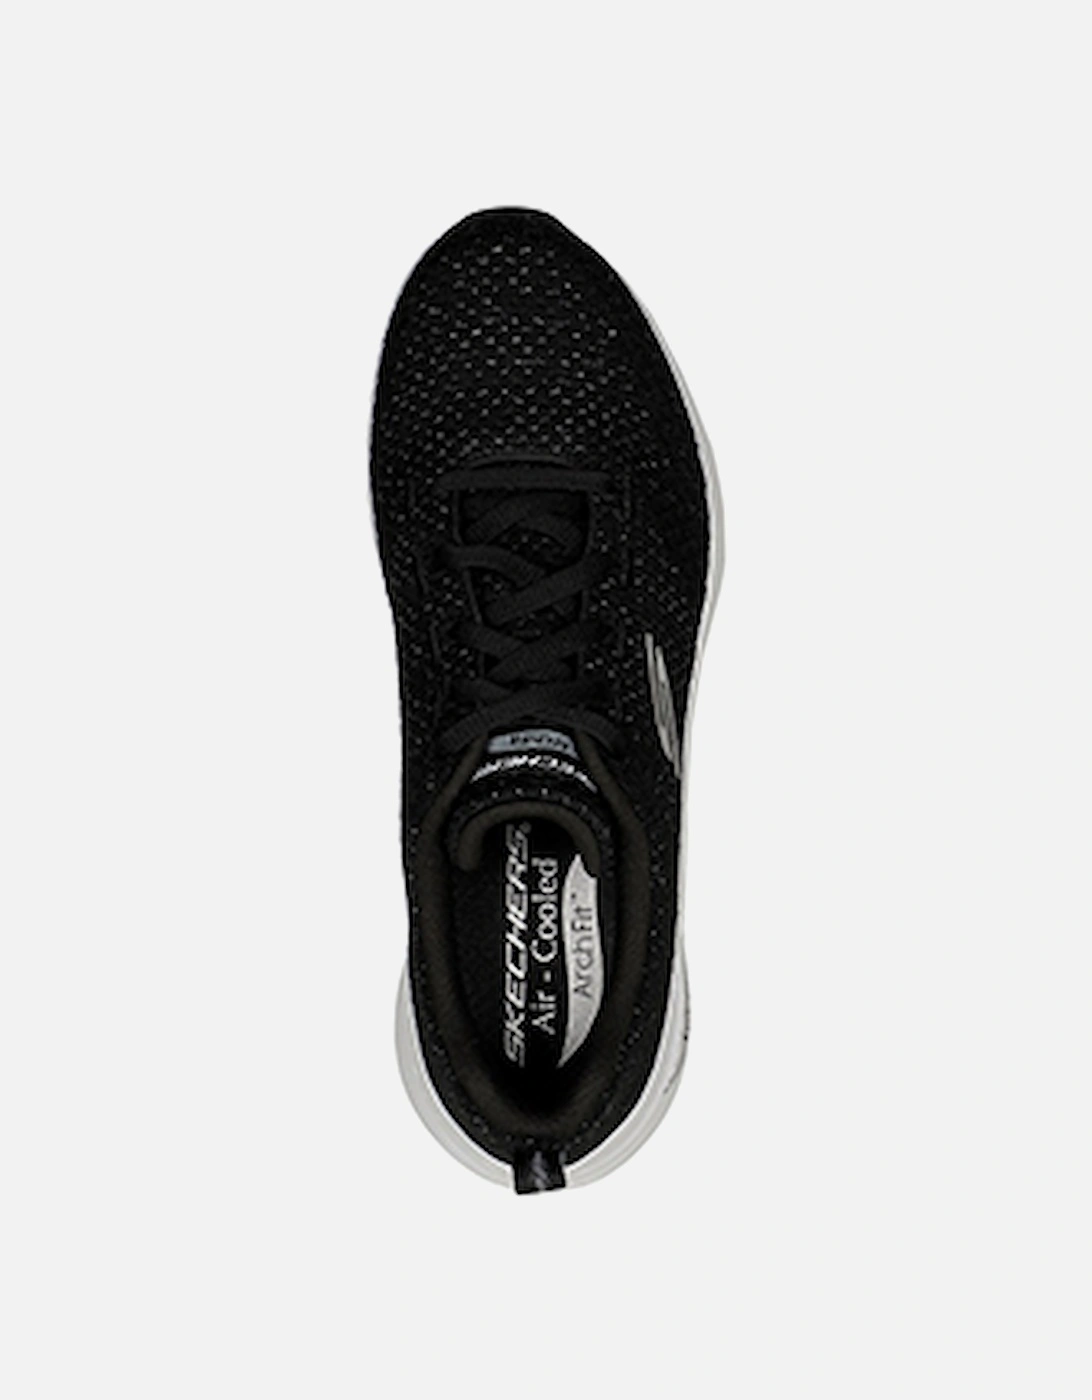 Women's Arch Fit Glee For All   Black/White